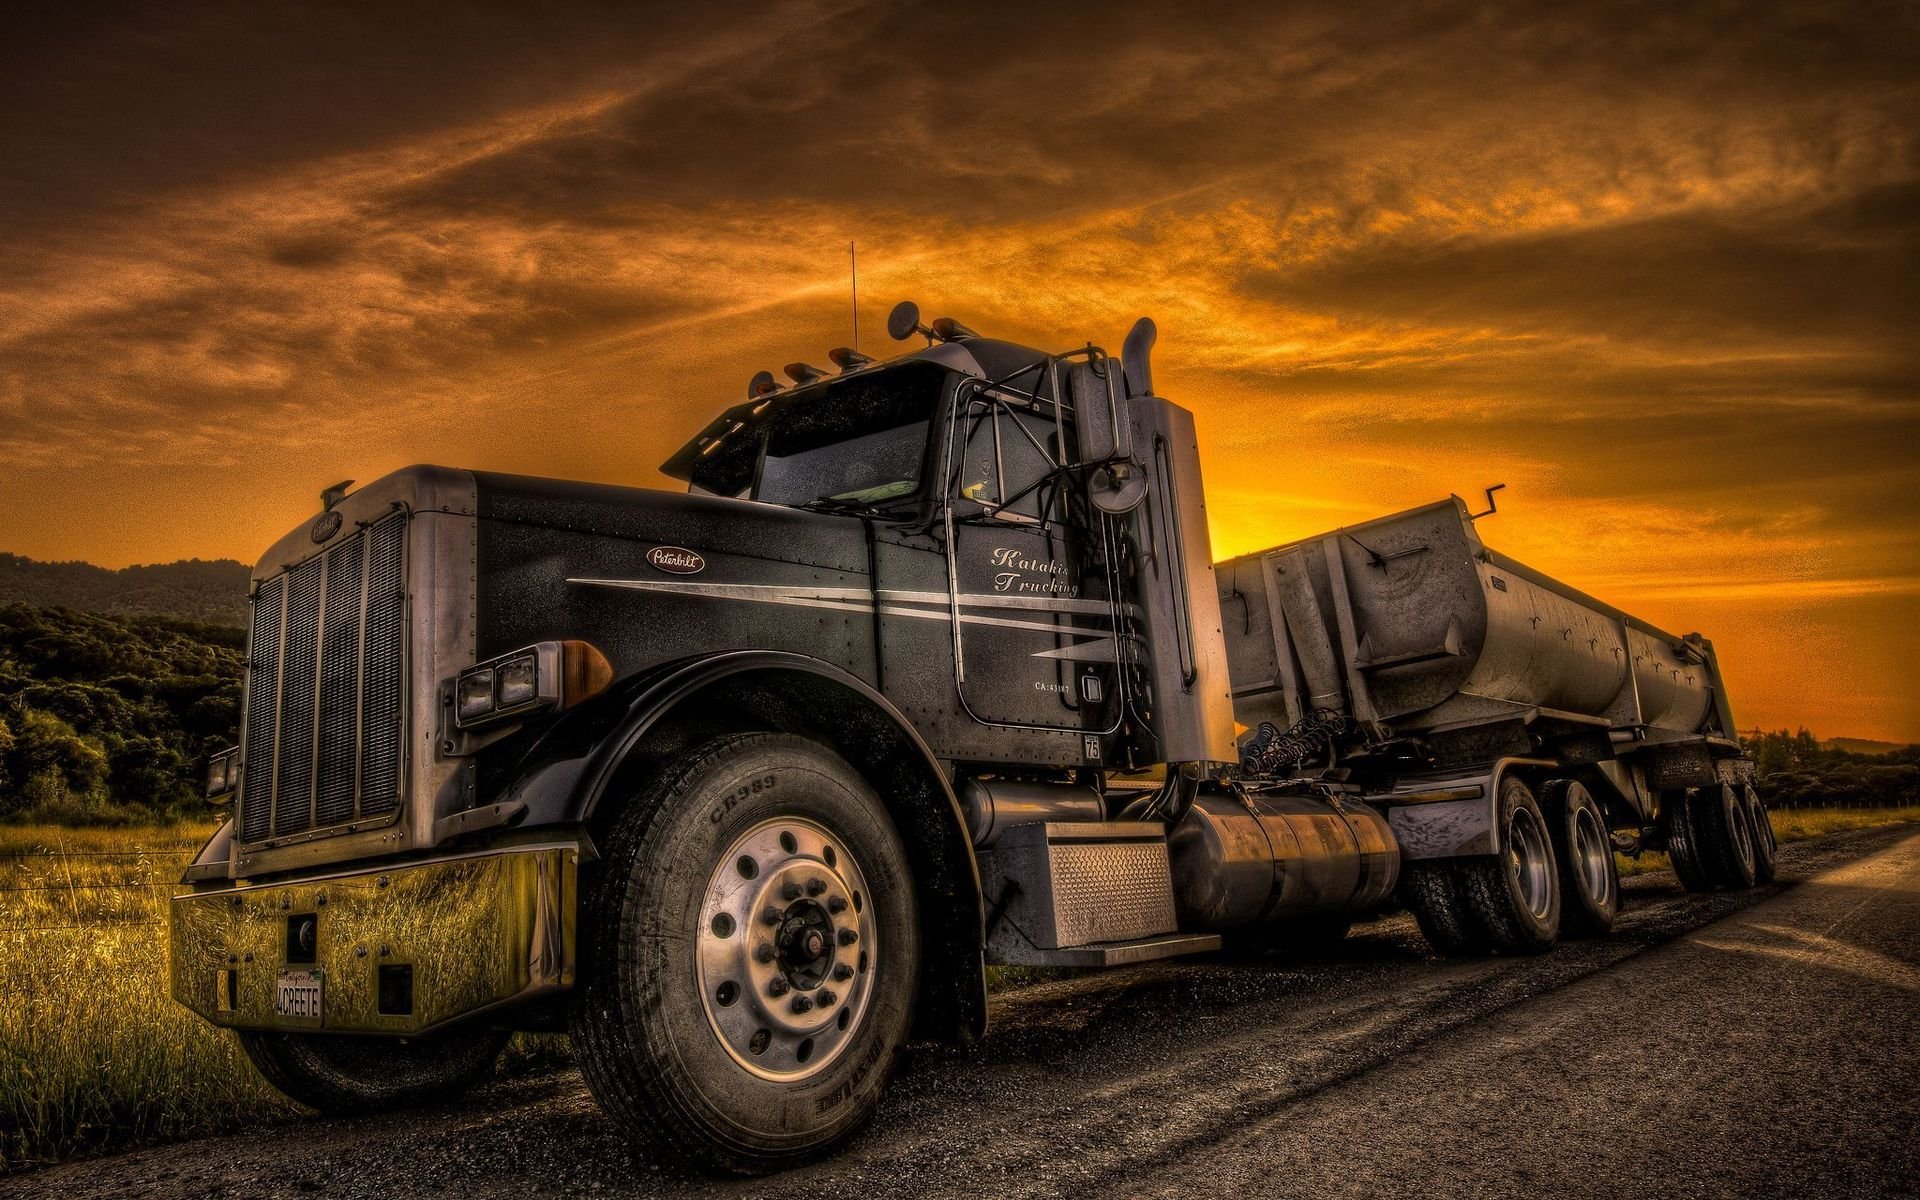 60+ Absolutely Stunning Truck Wallpapers in HD